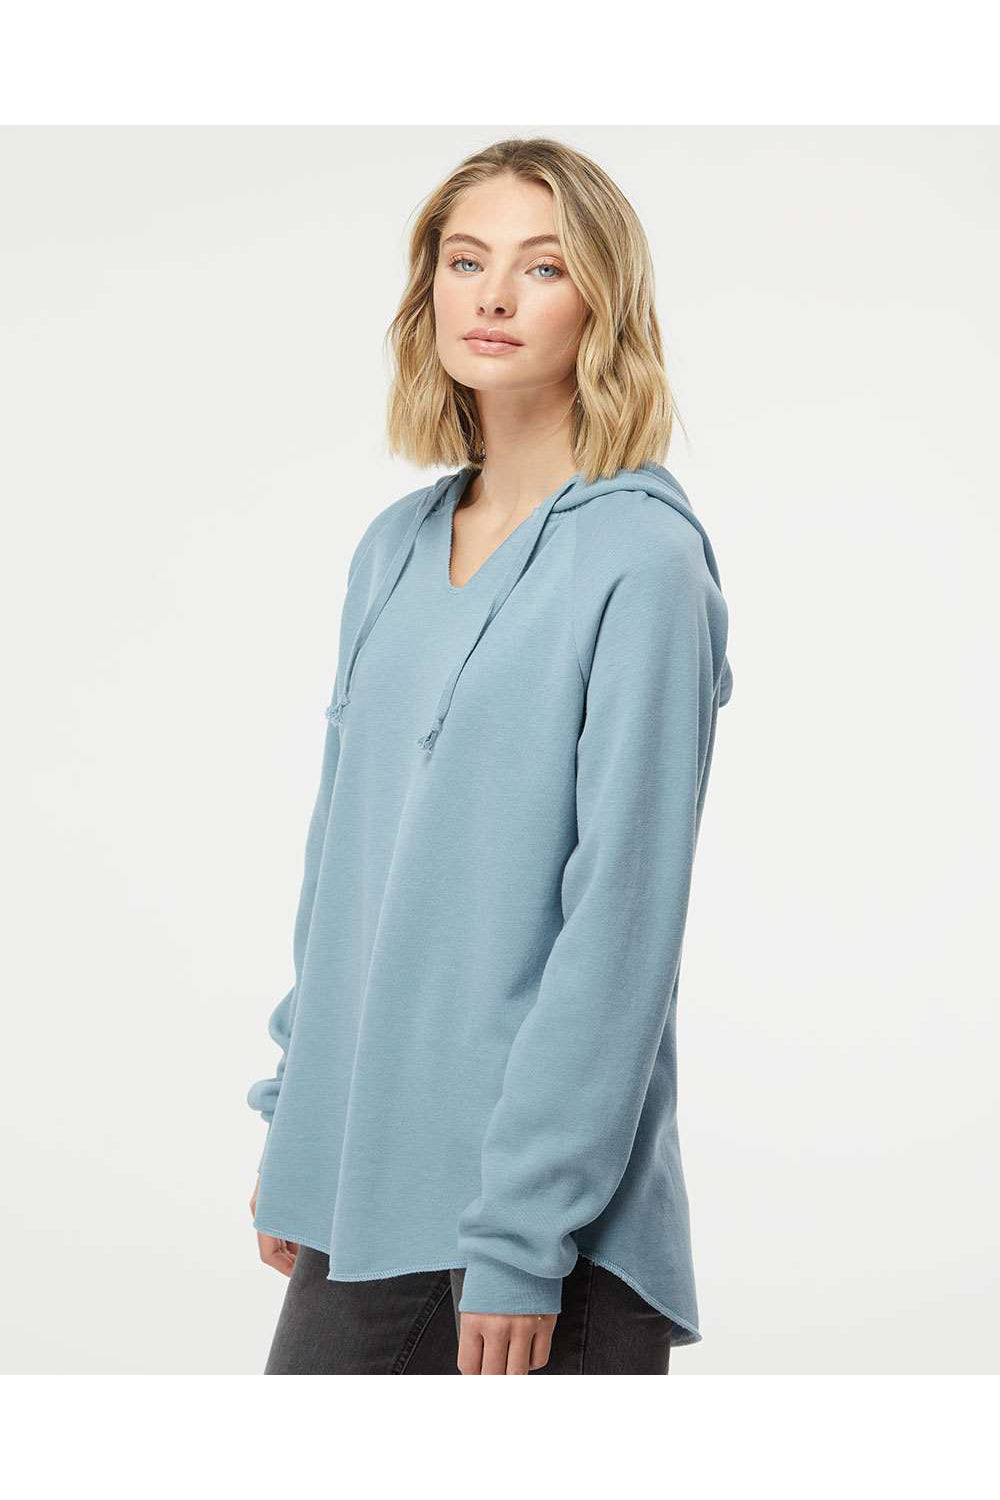 Independent Trading Co. PRM2500 Womens California Wave Wash Hooded Sweatshirt Hoodie Misty Blue Model Side